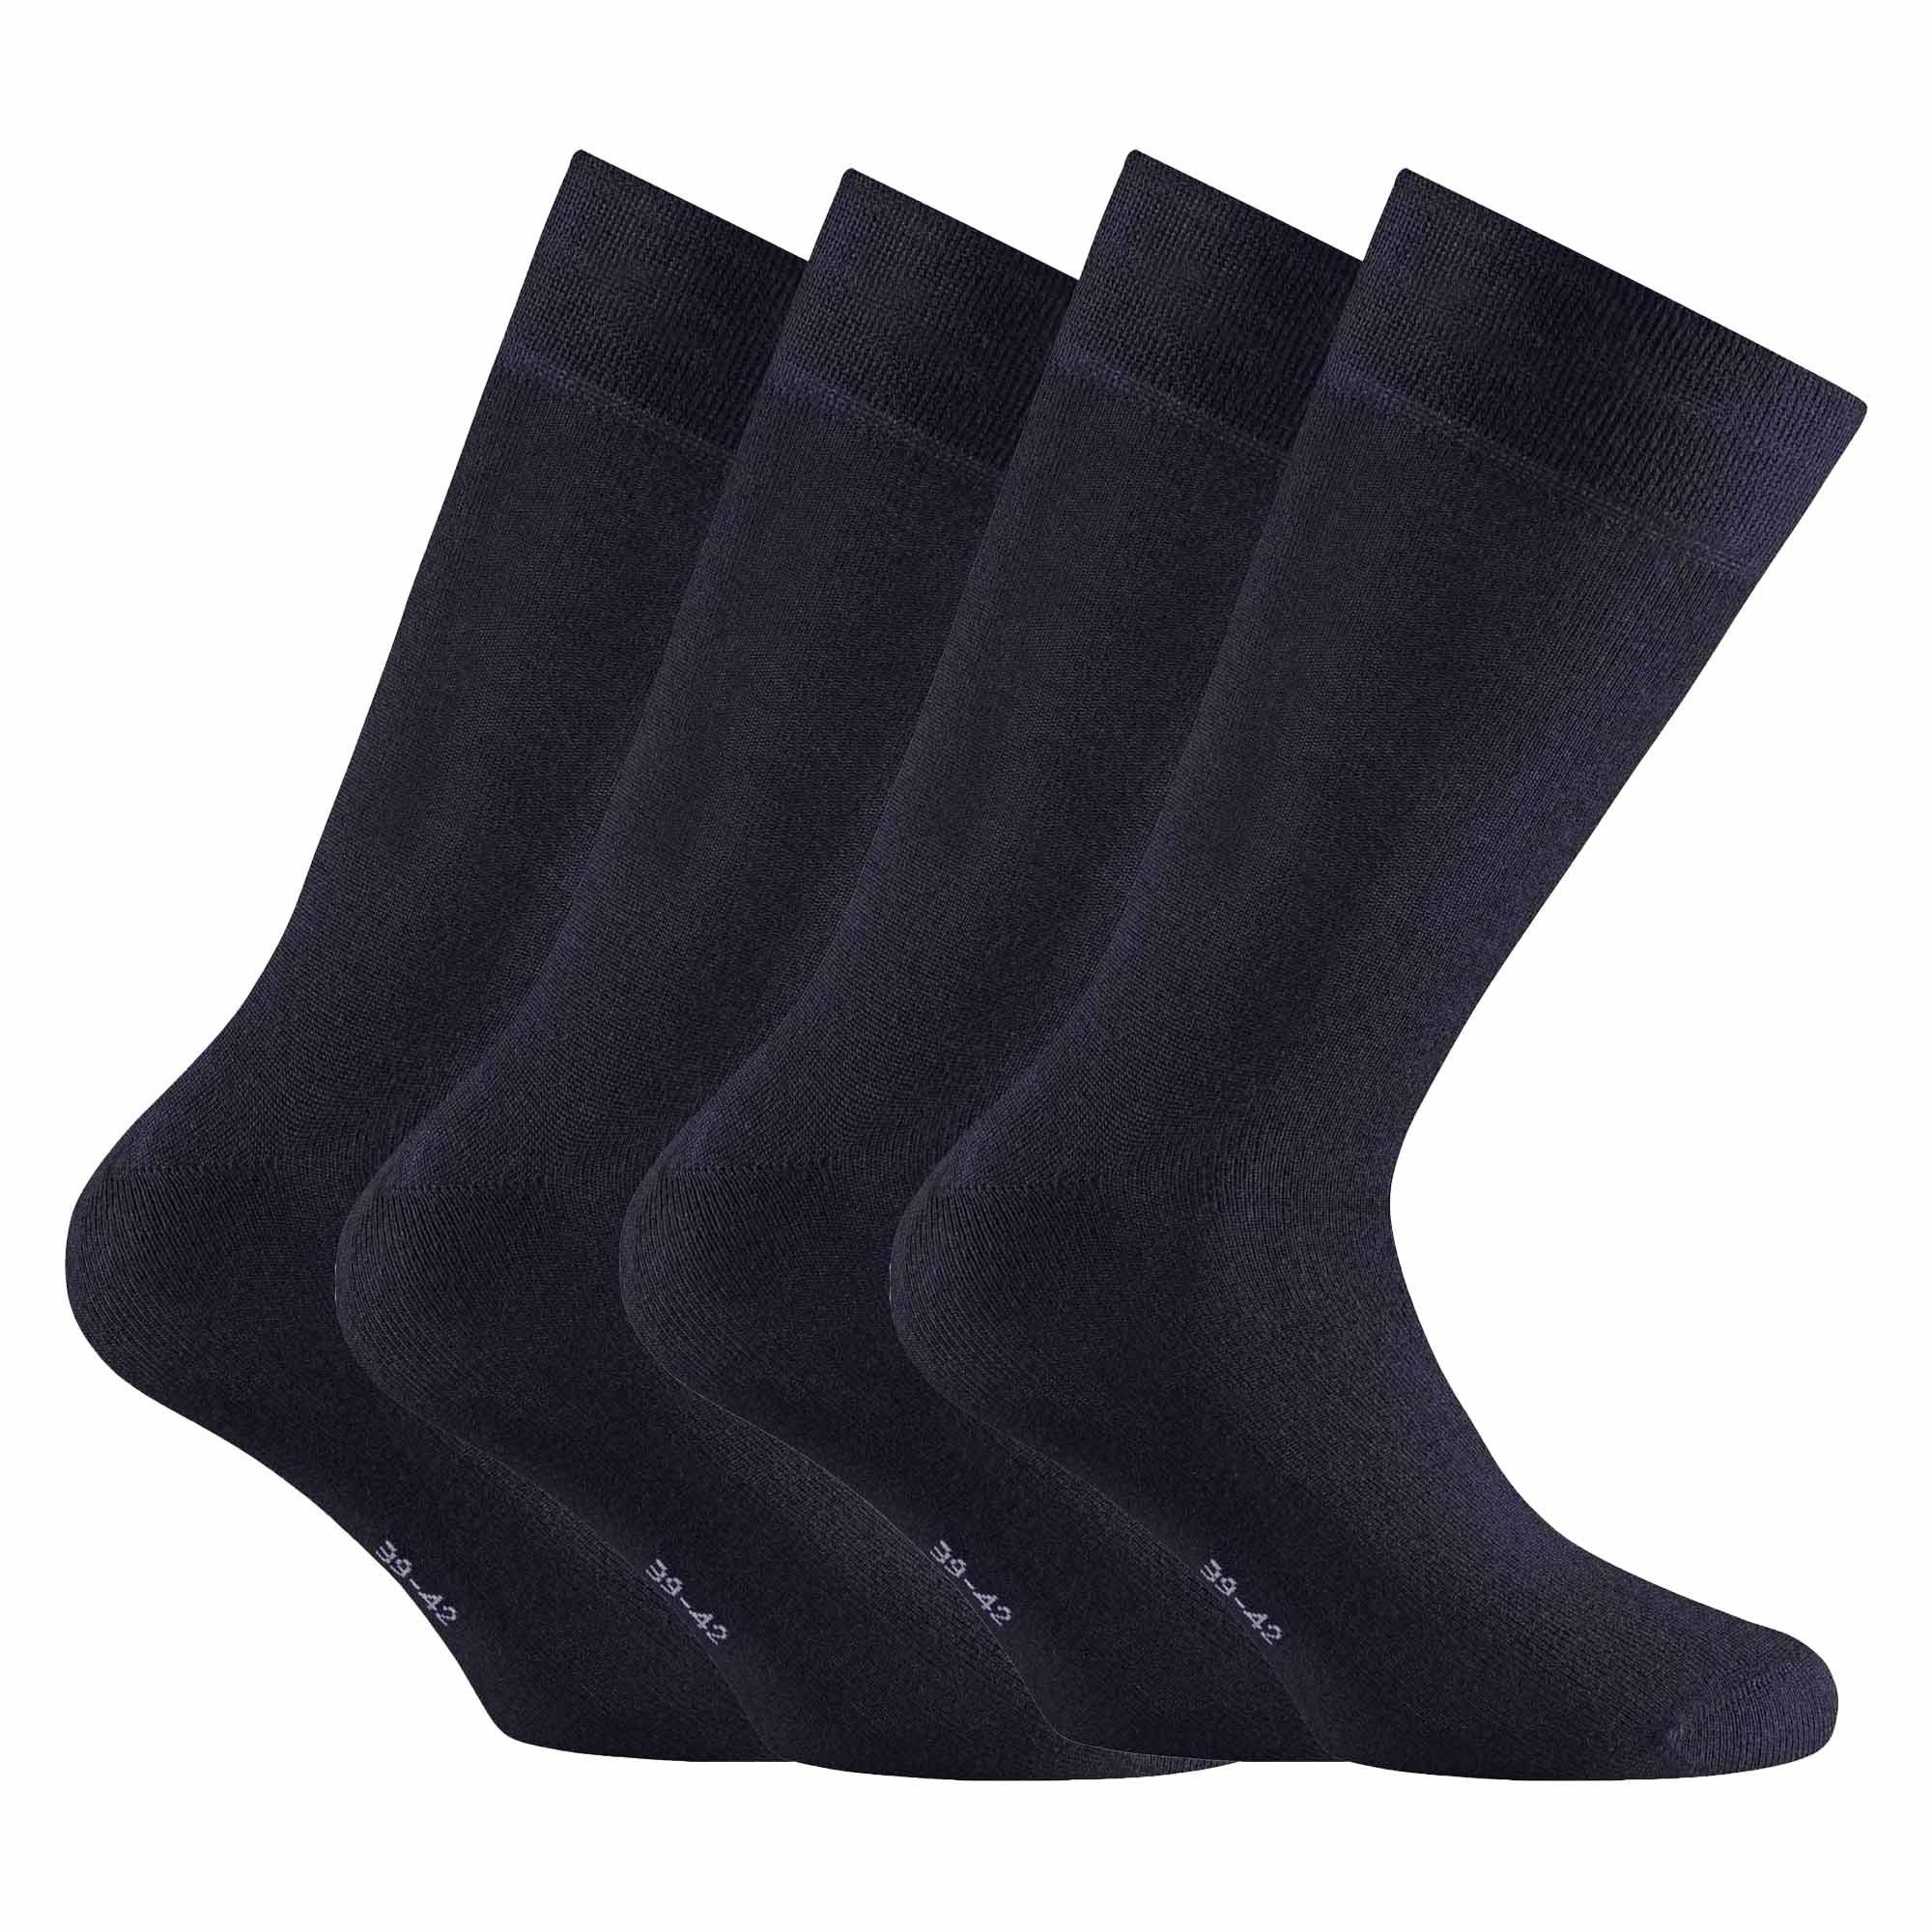 Rohner  Chaussettes  Confortable à porter-Bamboo 2er pack 